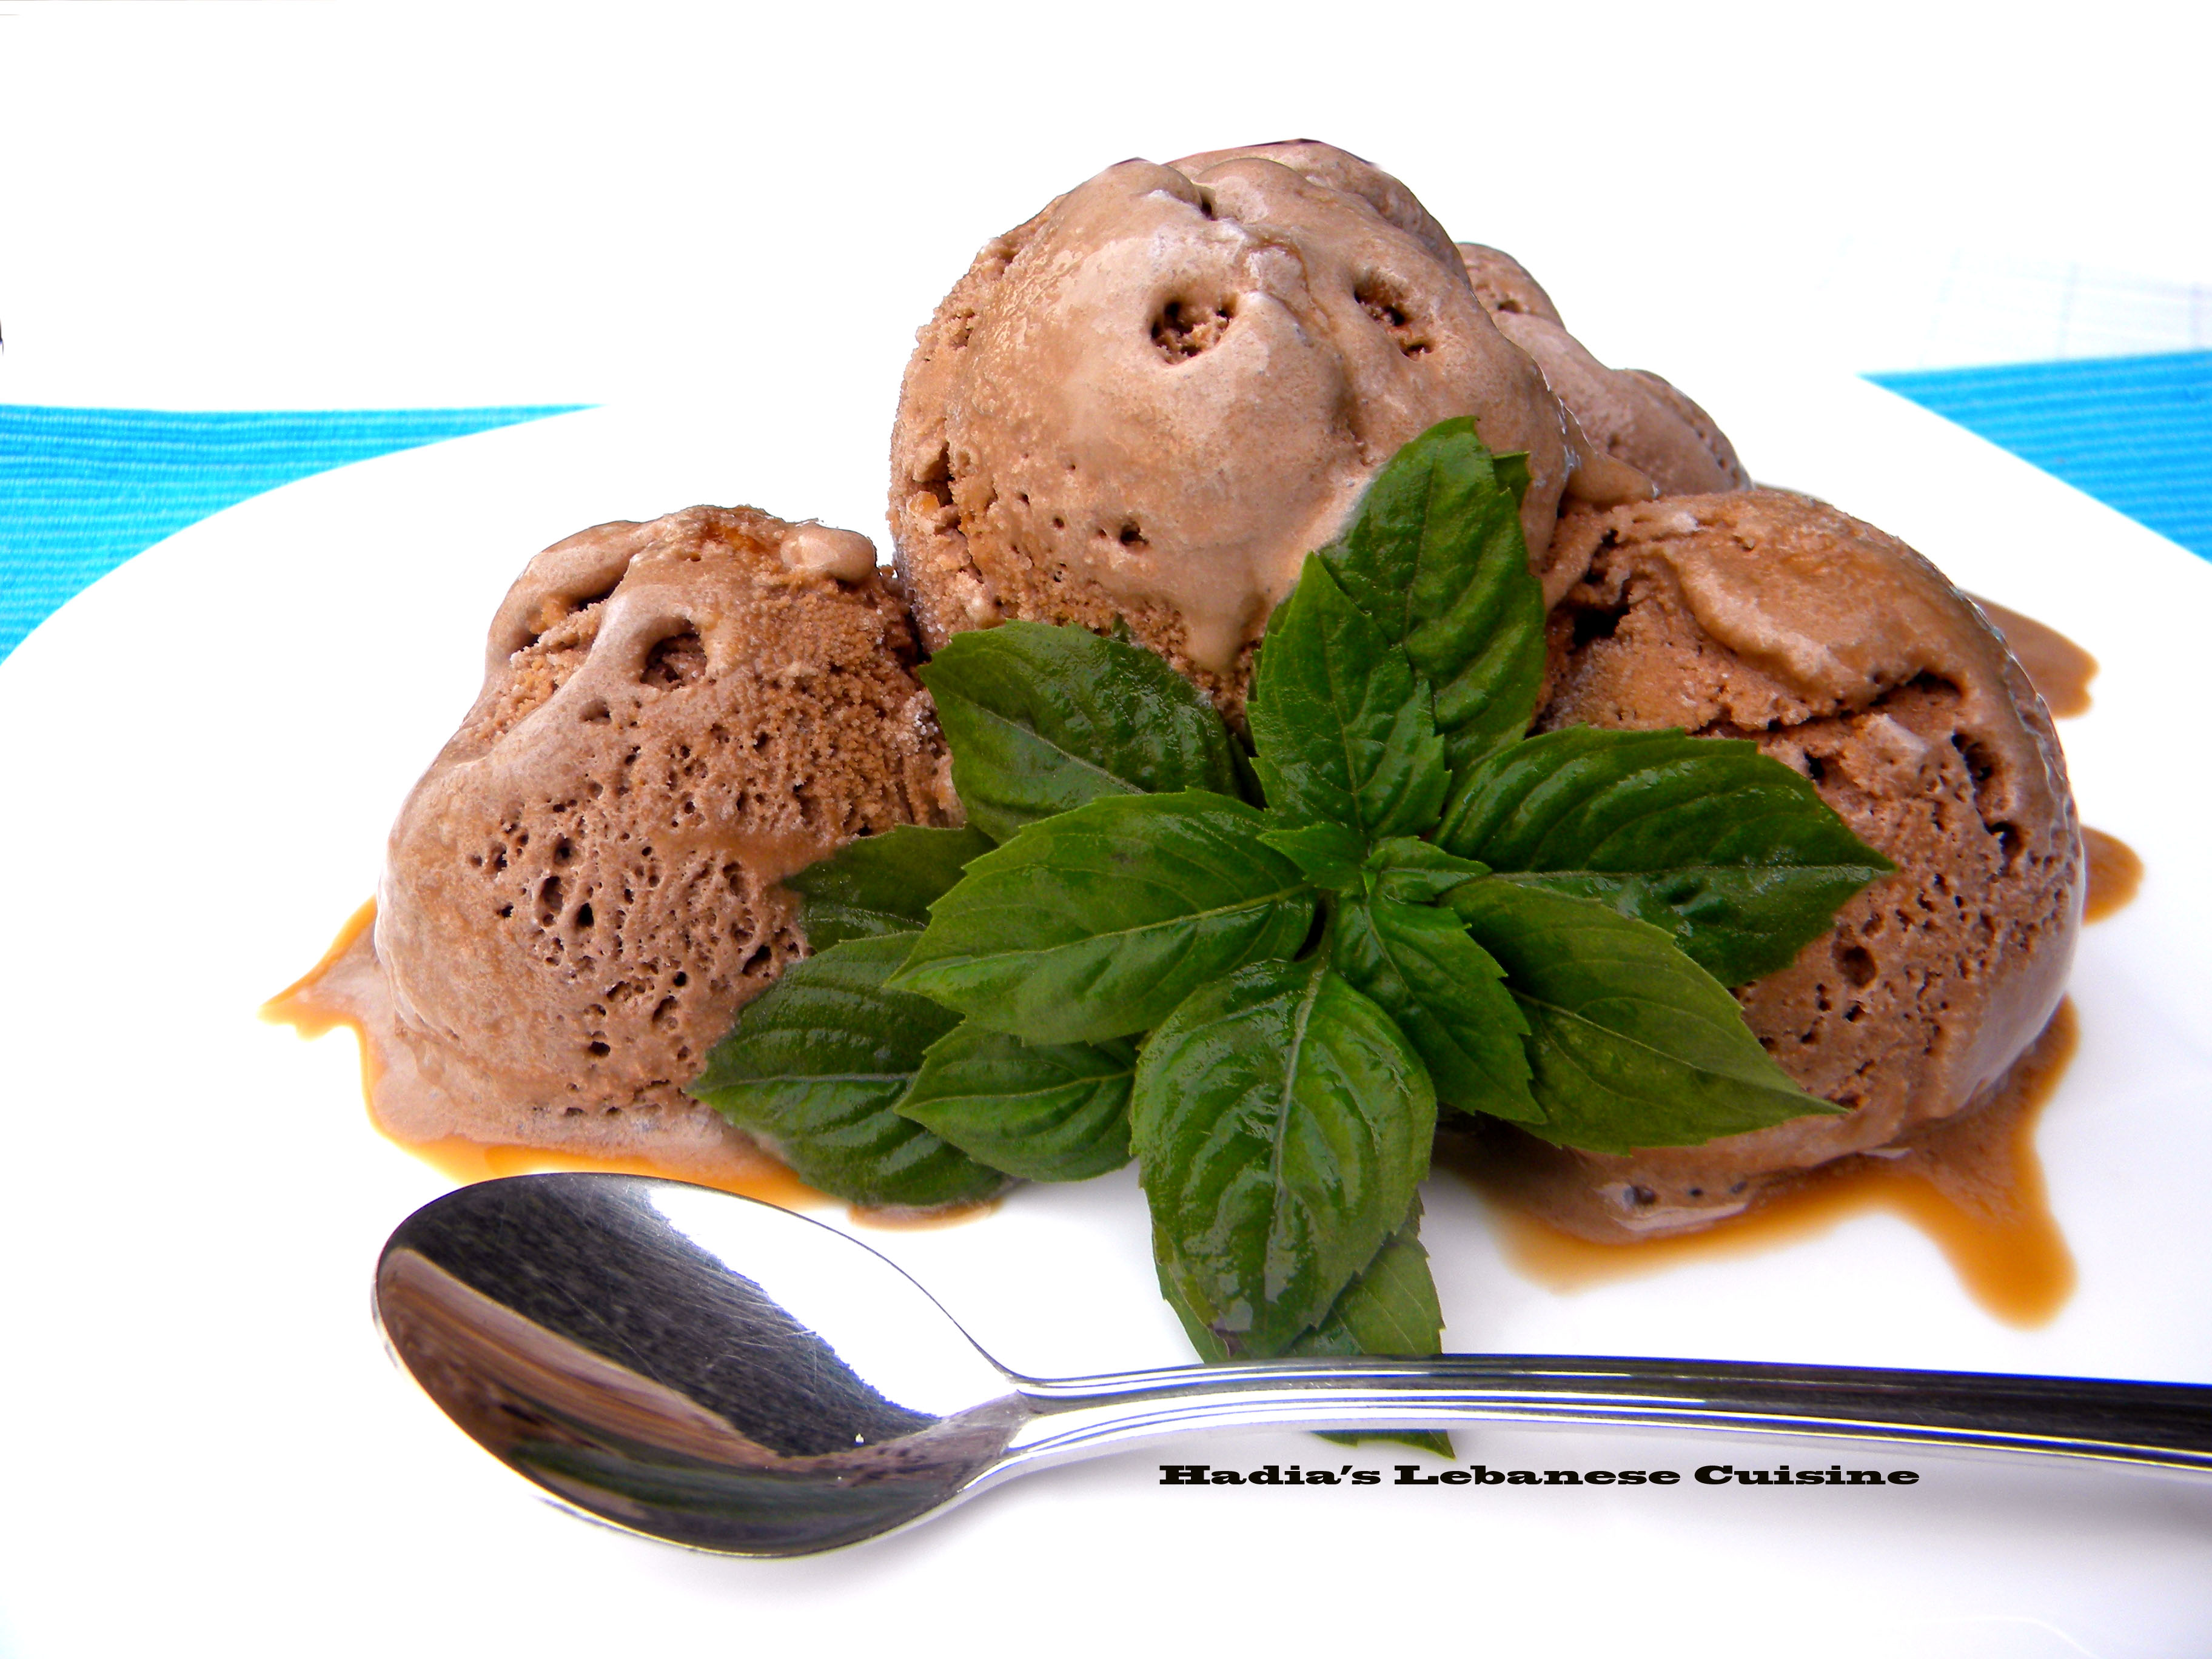 Chocolate Ice Cream....Woo – hoo! It is summer! Nothing says summer more than ice cream, and you know what that means